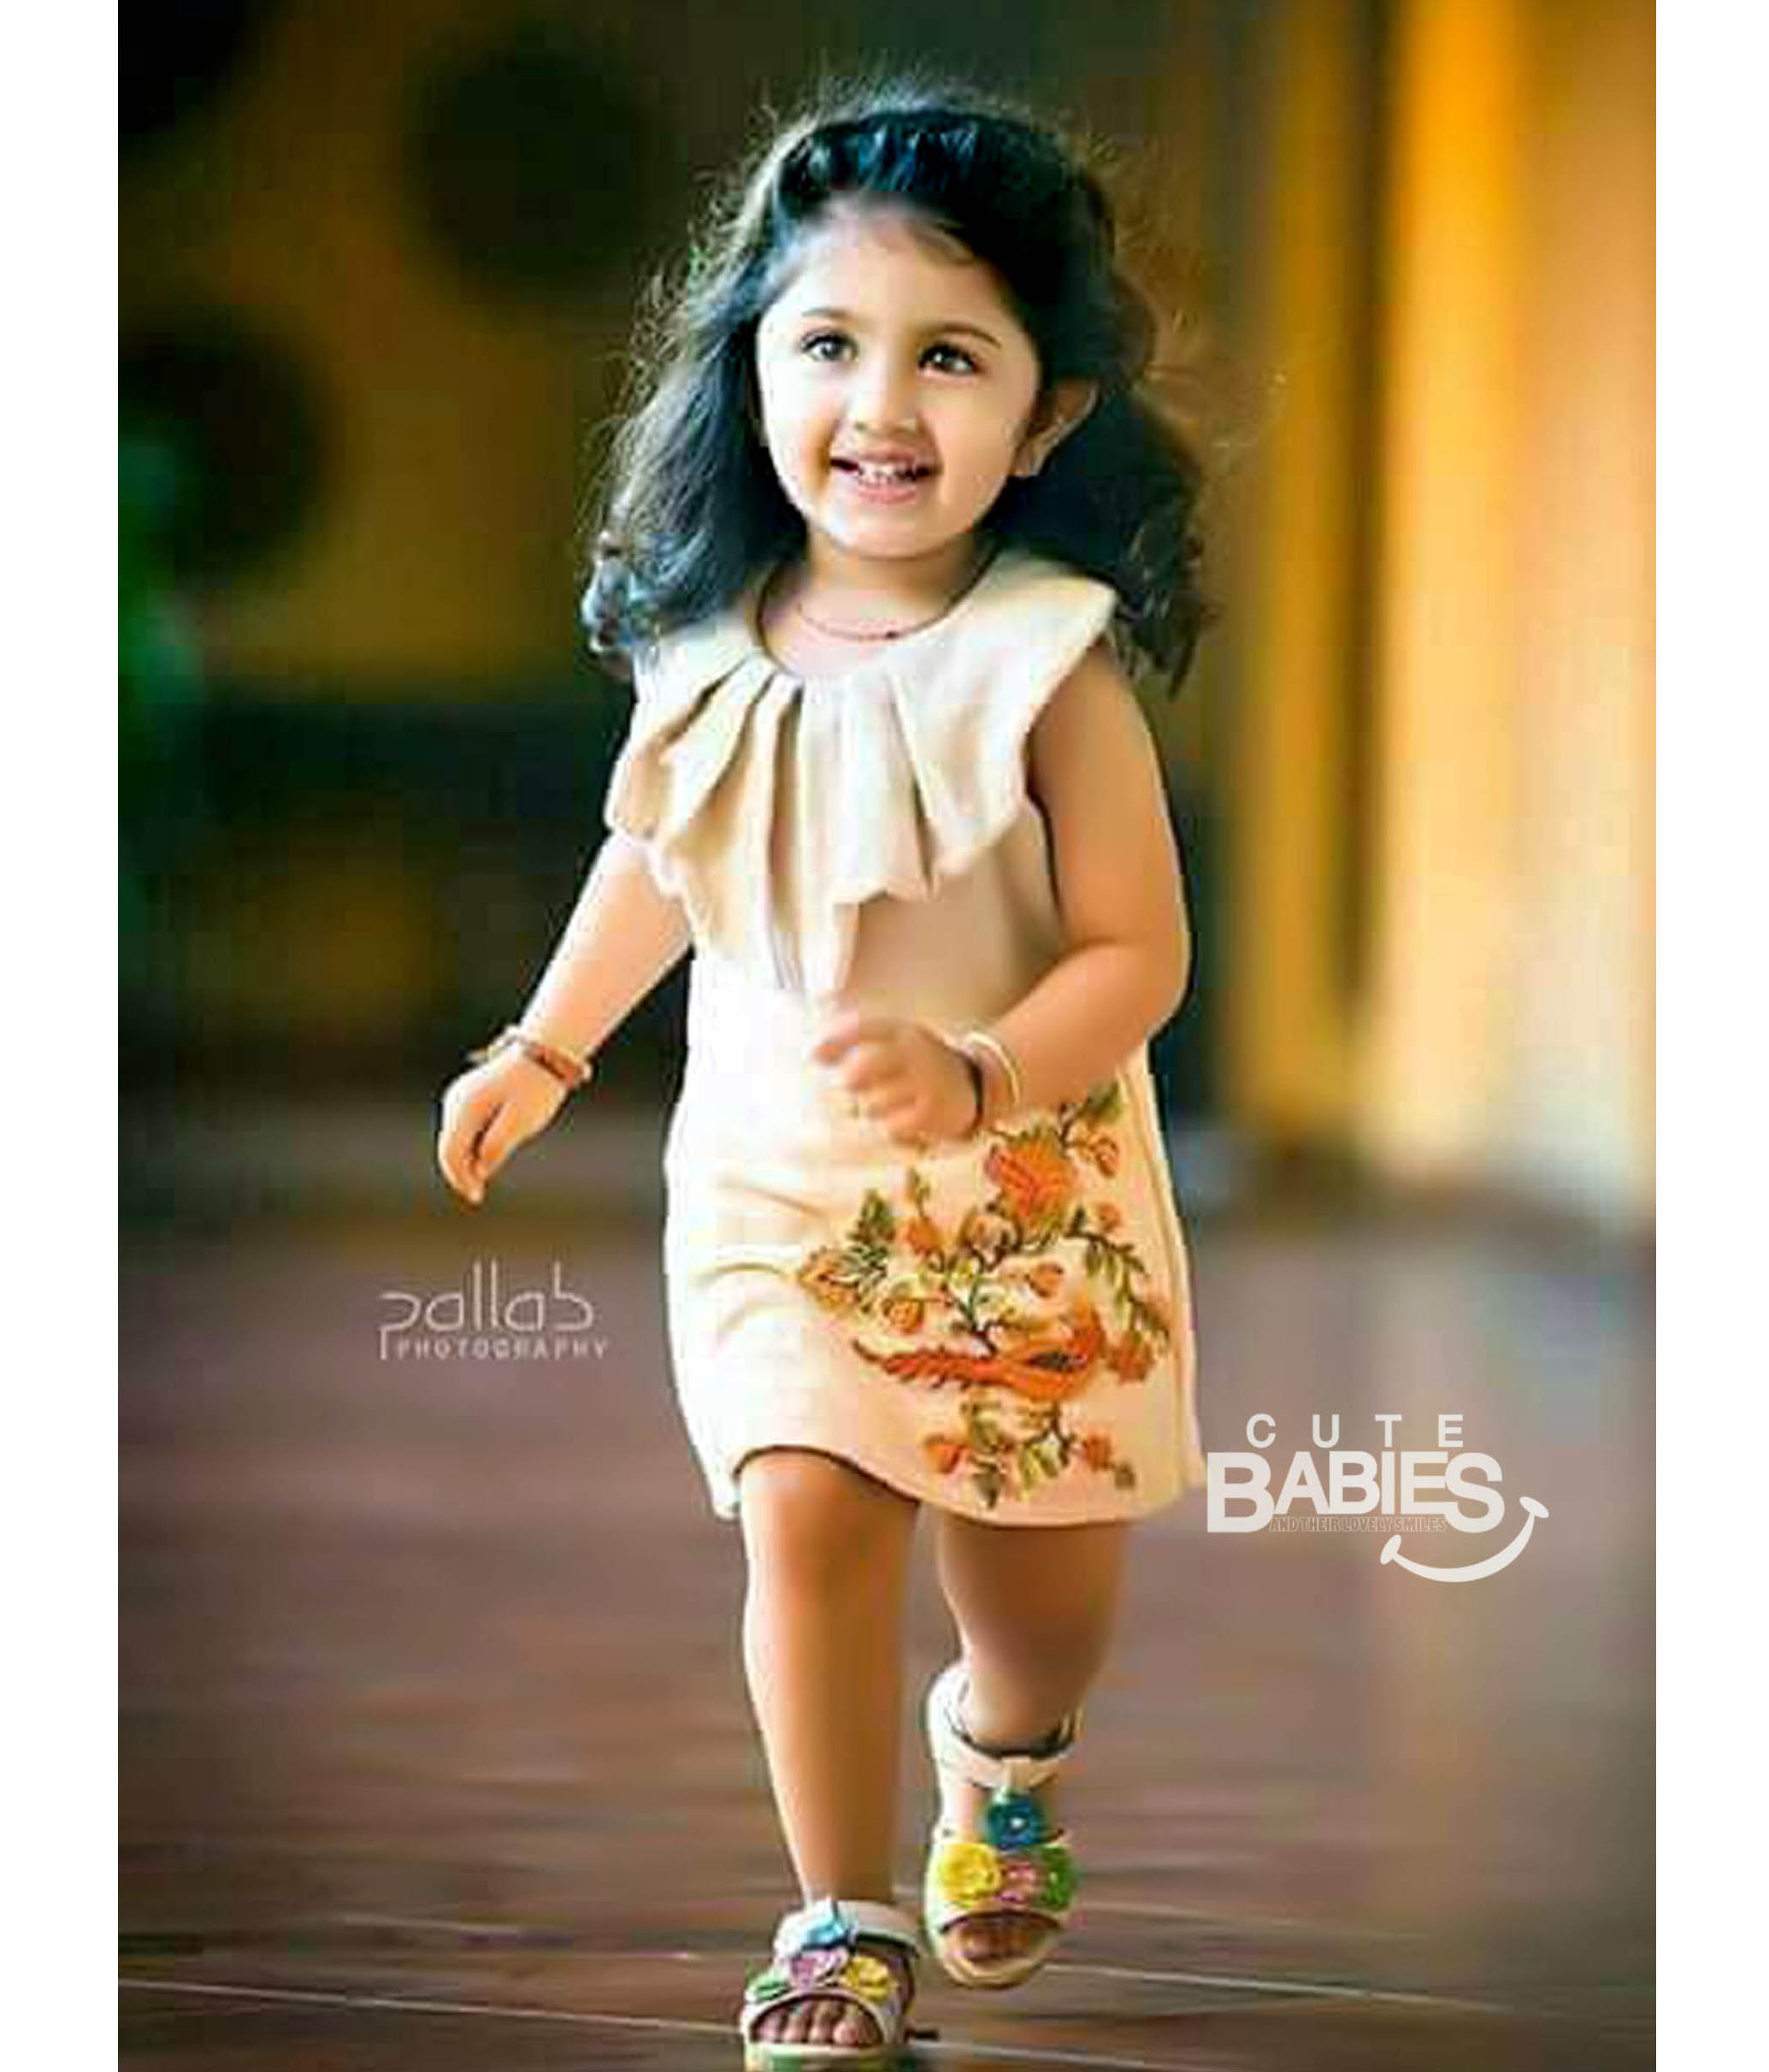 Some Cute Indian Baby Girls 15 Images - My Baby Smiles